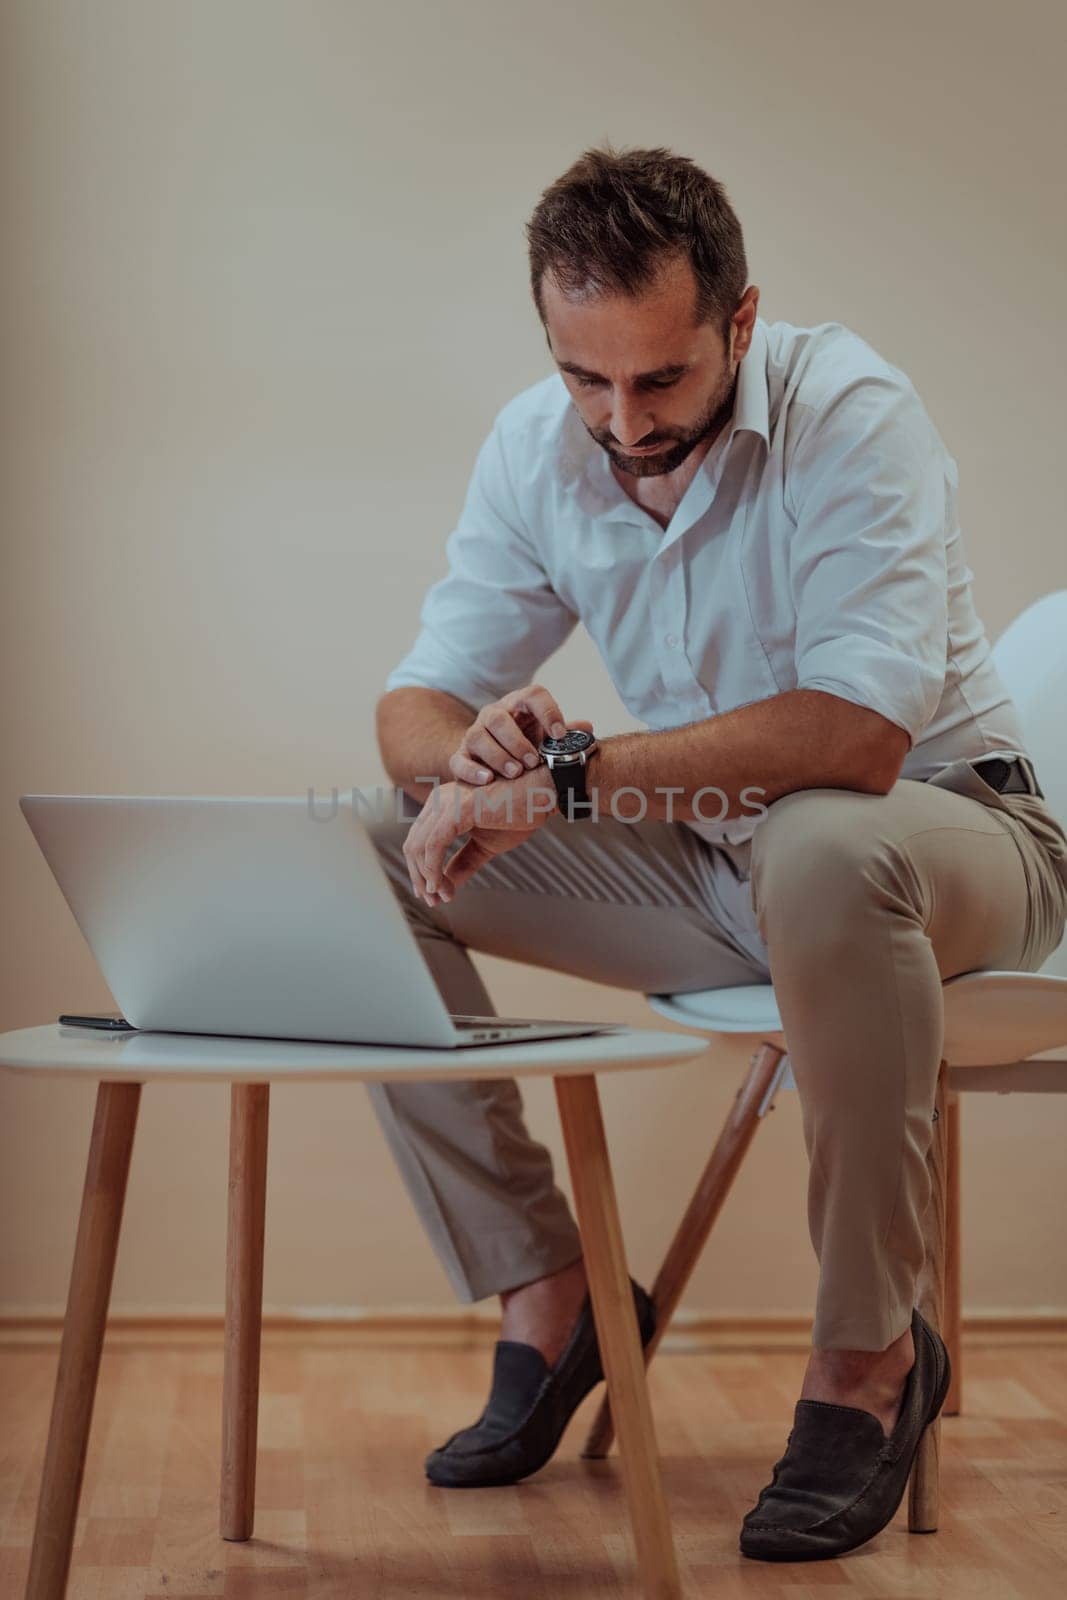 A confident businessman sitting and using laptop and smartwatch with a determined expression, while a beige background enhances the professional atmosphere, showcasing his productivity and expertise